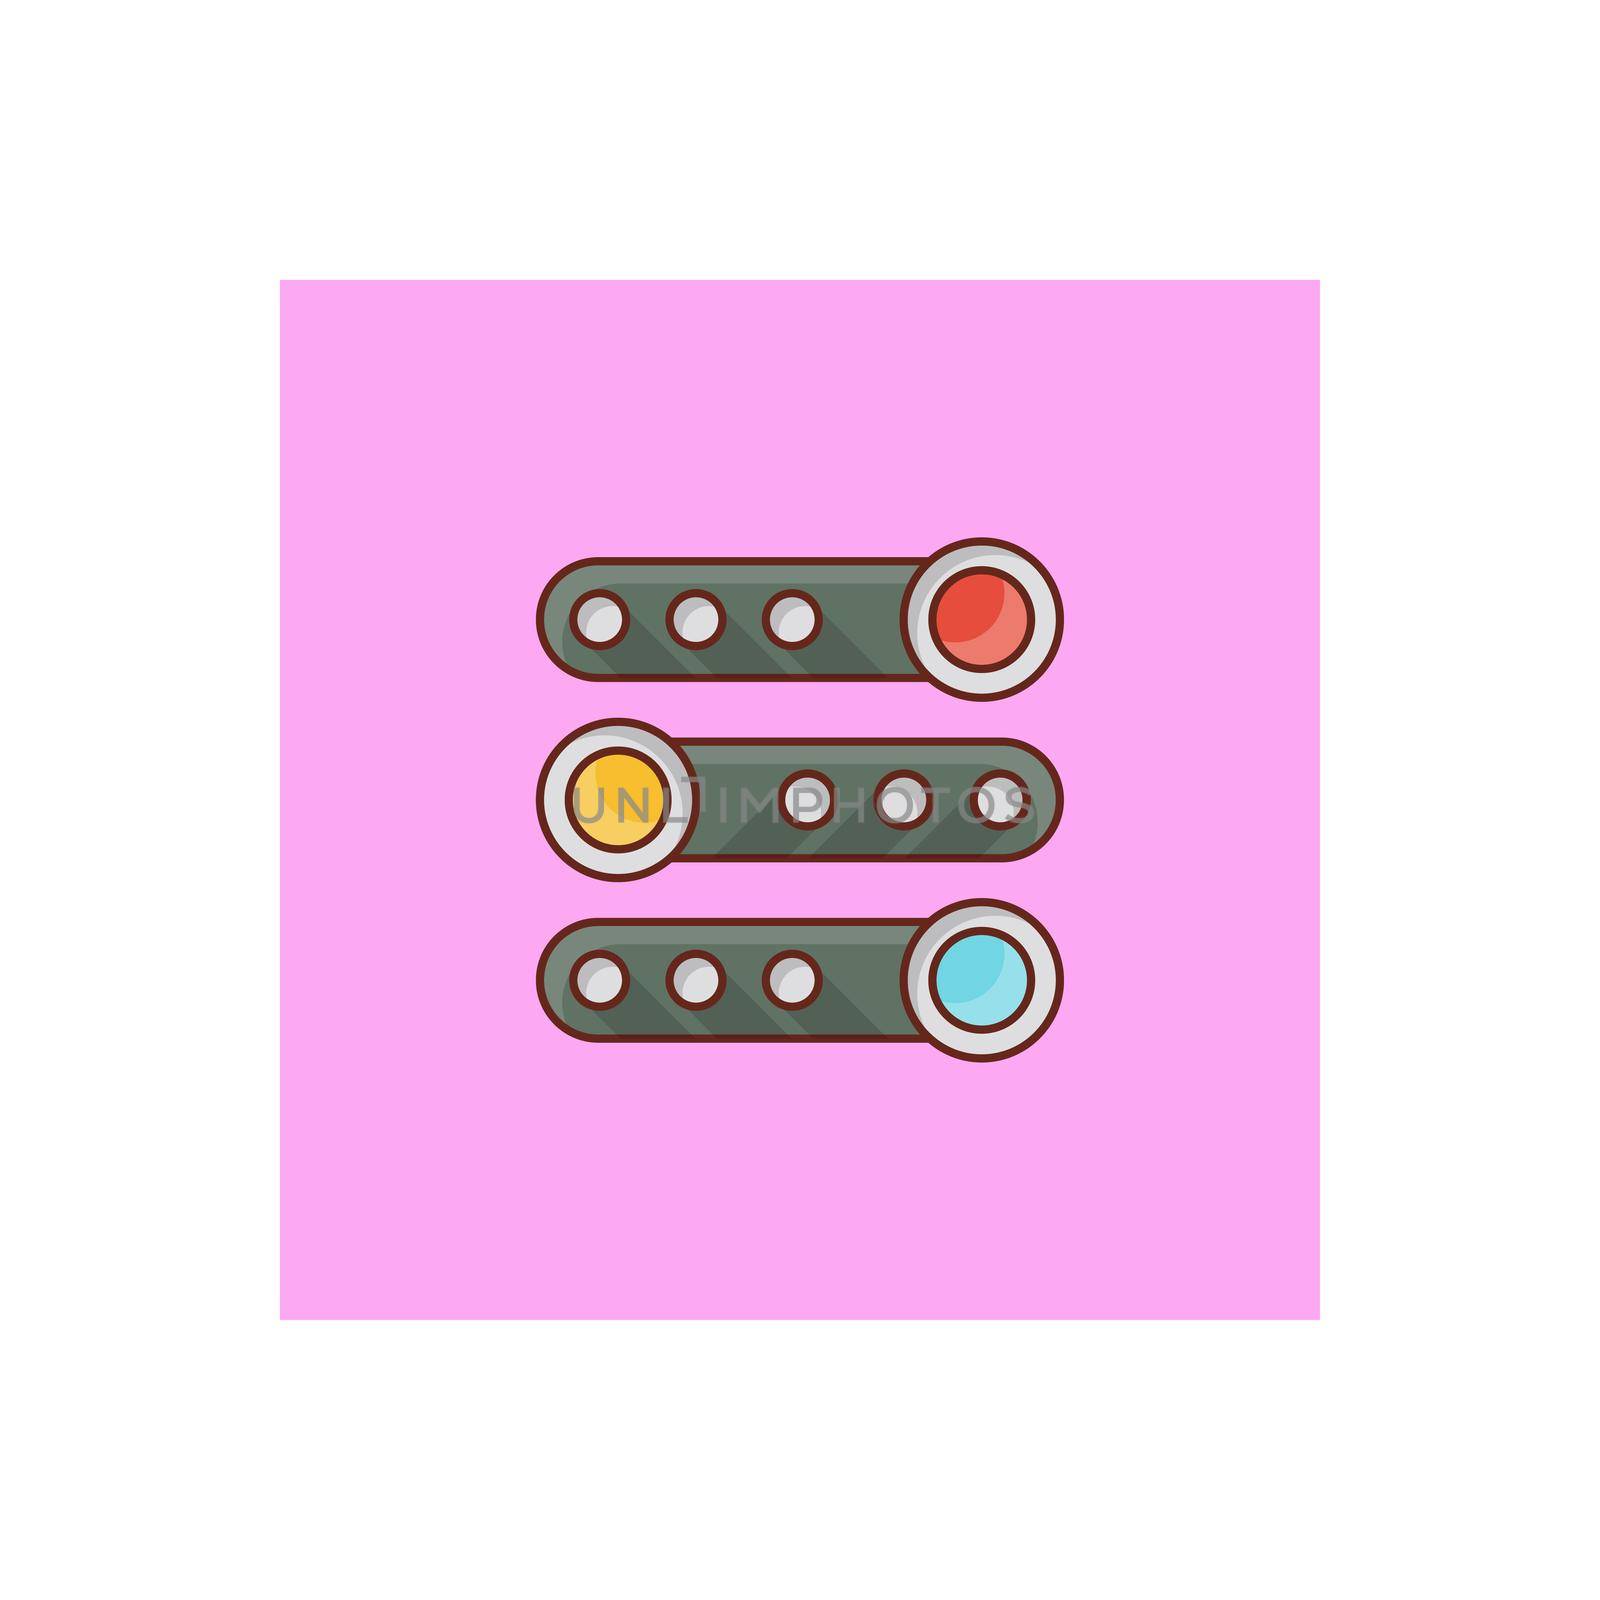 toggle by FlaticonsDesign